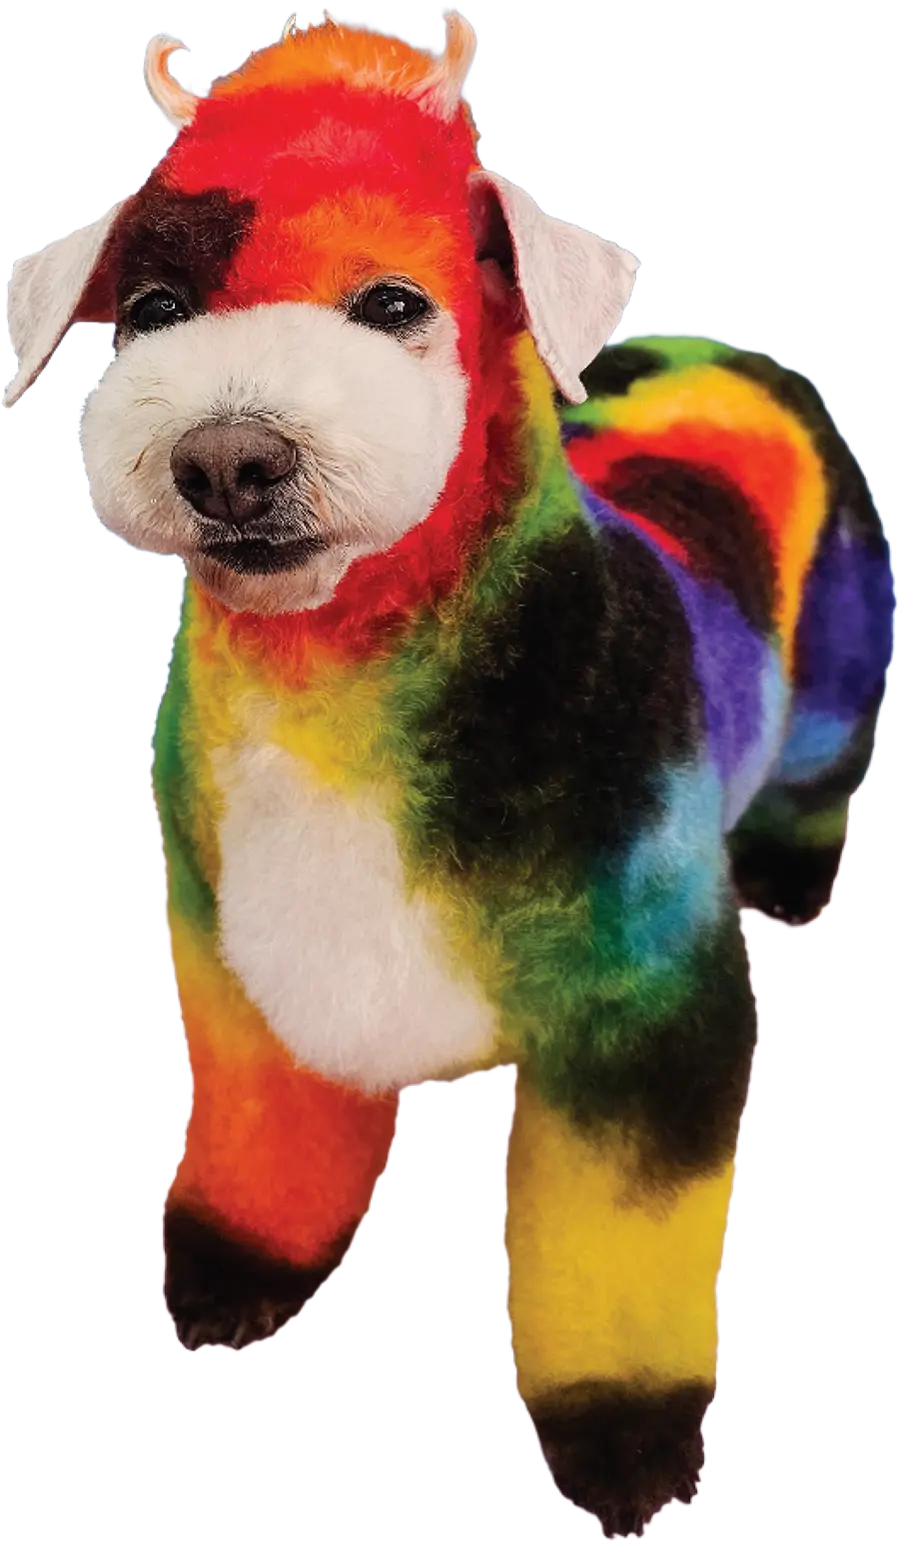 finished groomed dog that resembles a colorful cow